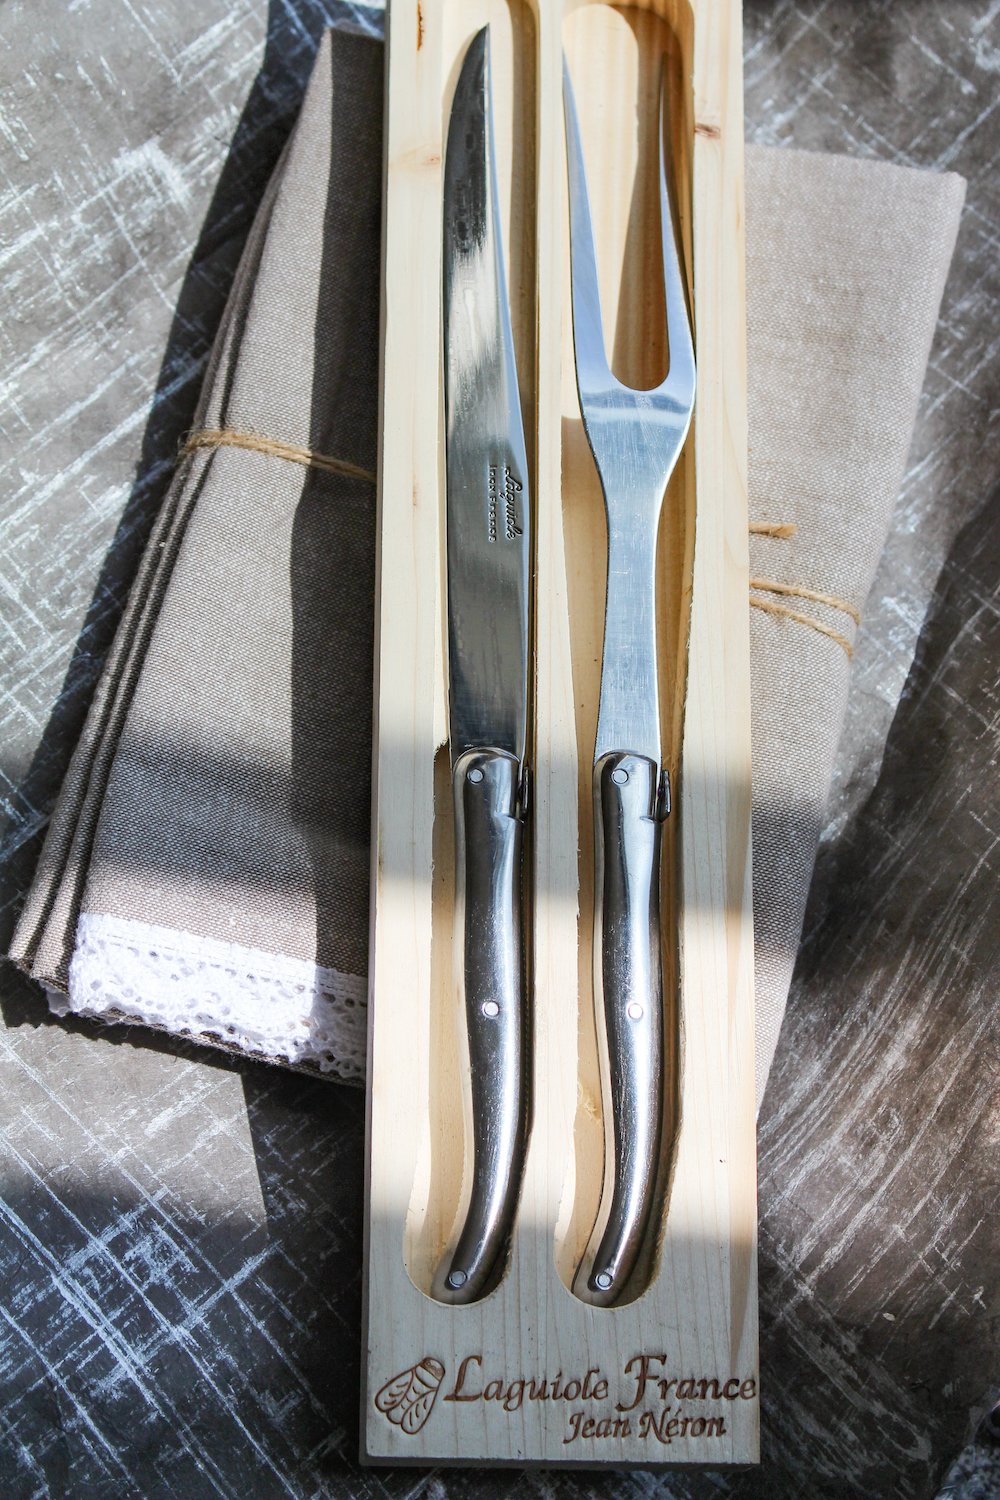 Laguiole Platine Stainless Steel Carving Set in Wood Box Cutlery Set Laguiole Brand_Laguiole Cheese Sets Kitchen_Dinnerware Laguiole Loose Mini Rainbow Utensils Serveware laguiole-stainless-steel-carving-set_1500x1000_95fa3910-2861-4f1d-ae95-993f50ac15ca